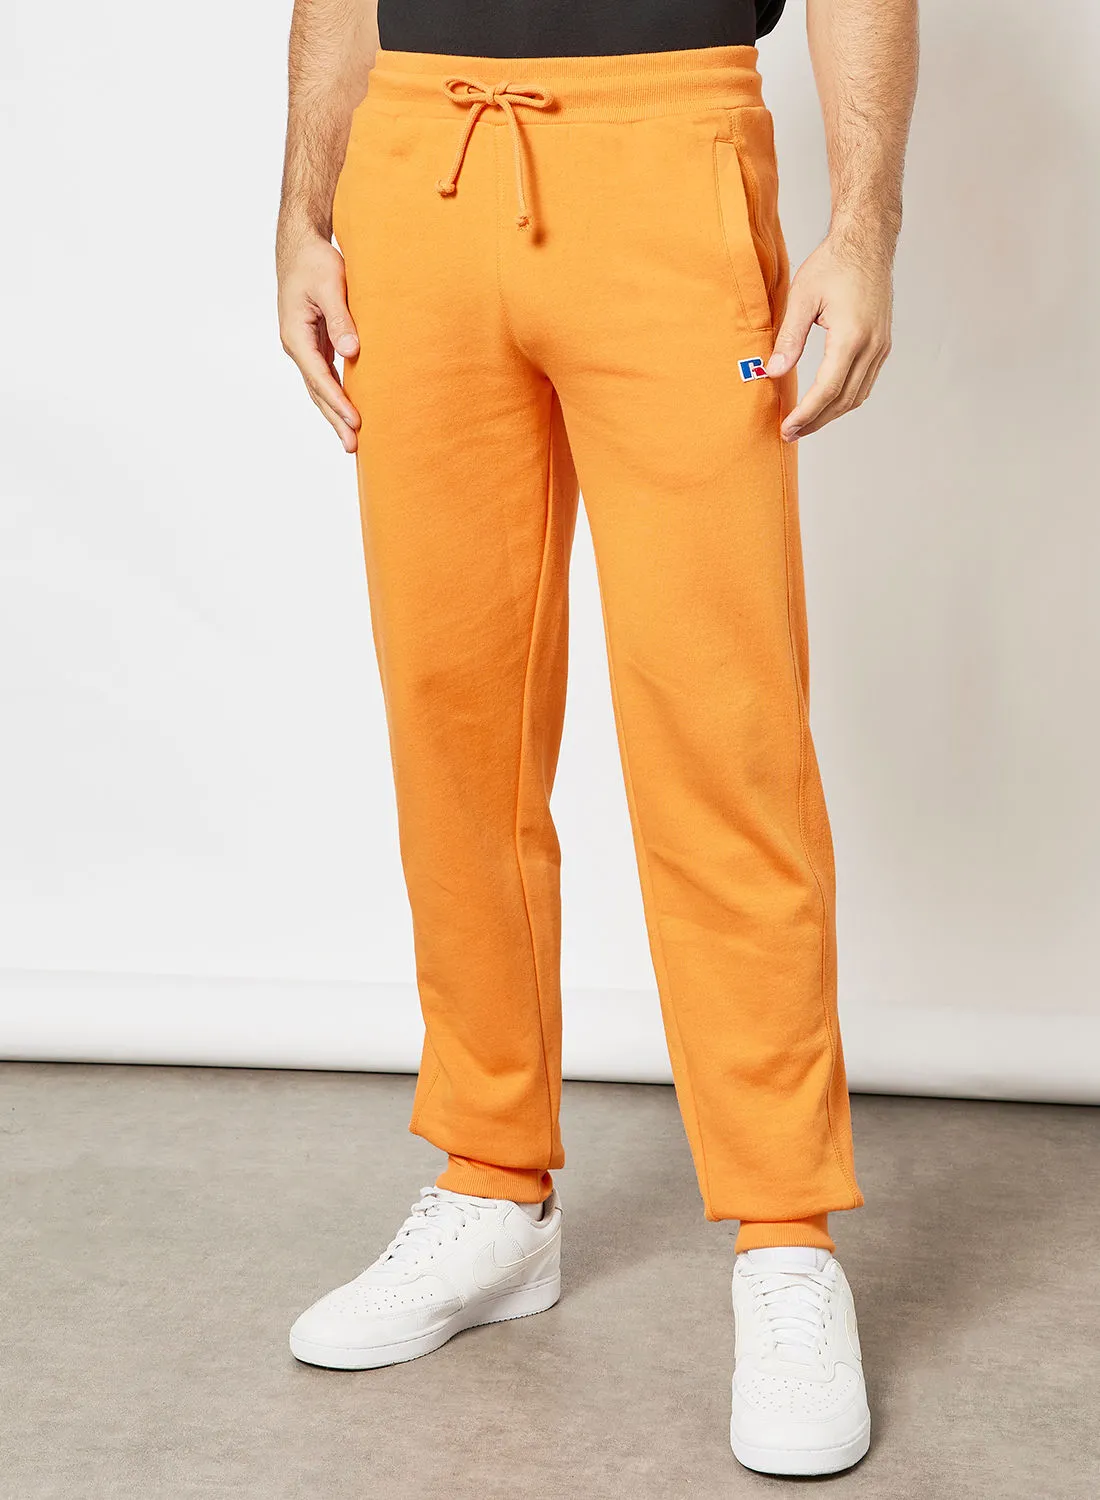 Russell Athletic Embroidered Logo Sweatpants Orange